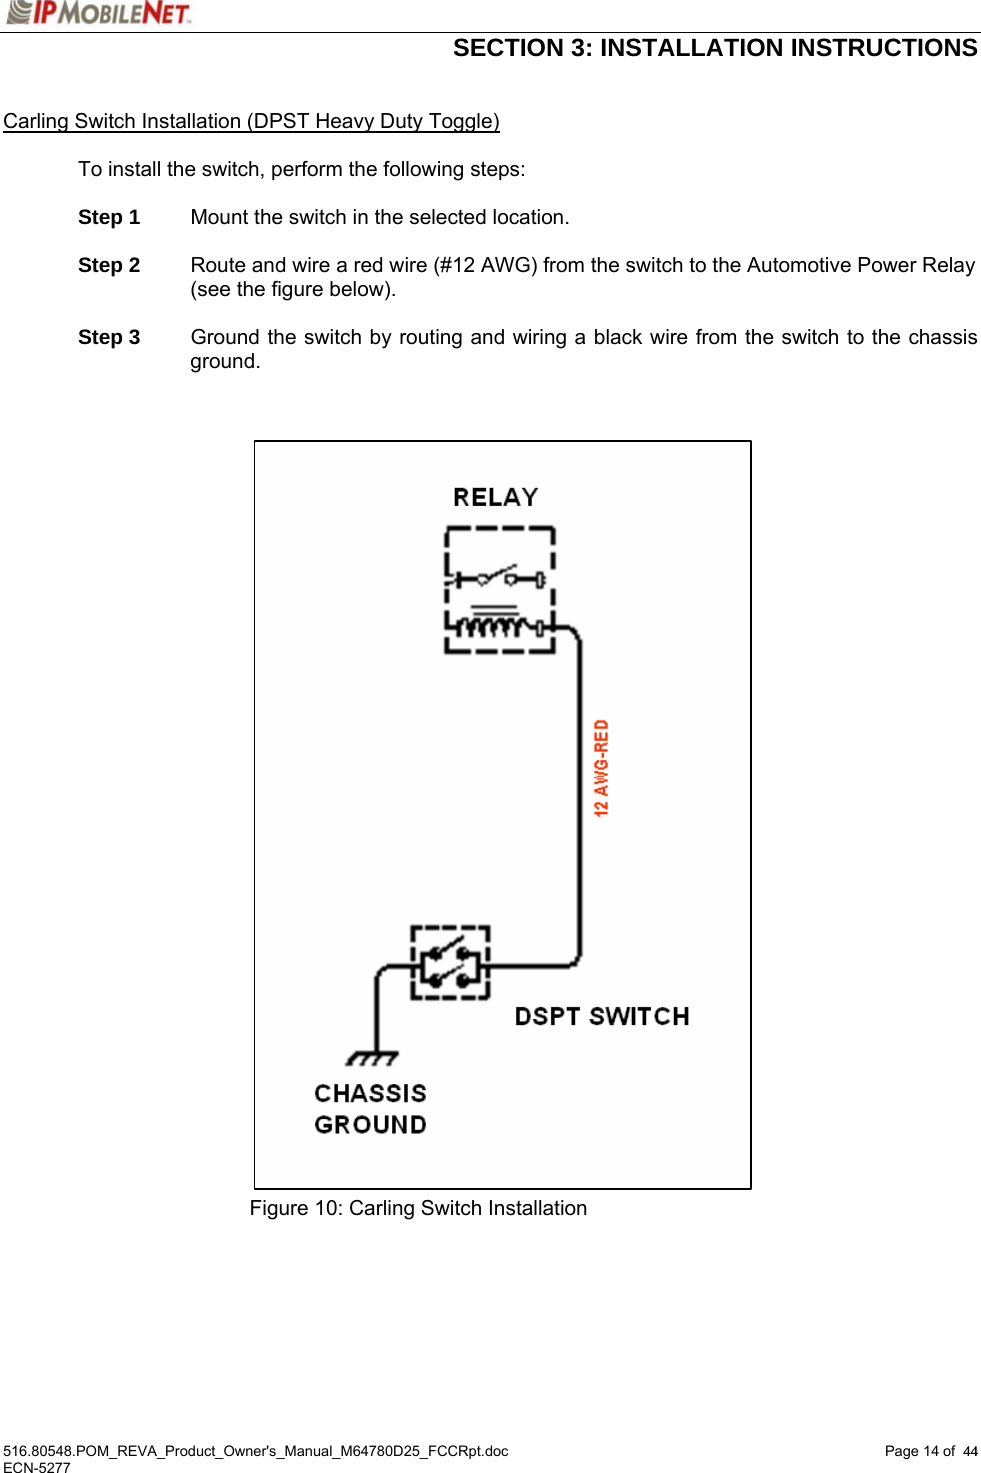  SECTION 3: INSTALLATION INSTRUCTIONS  516.80548.POM_REVA_Product_Owner&apos;s_Manual_M64780D25_FCCRpt.doc Page 14 of  44 ECN-5277  44 Carling Switch Installation (DPST Heavy Duty Toggle)  To install the switch, perform the following steps:   Step 1  Mount the switch in the selected location.   Step 2  Route and wire a red wire (#12 AWG) from the switch to the Automotive Power Relay (see the figure below).   Step 3    Ground the switch by routing and wiring a black wire from the switch to the chassis ground.                                    Figure 10: Carling Switch Installation   